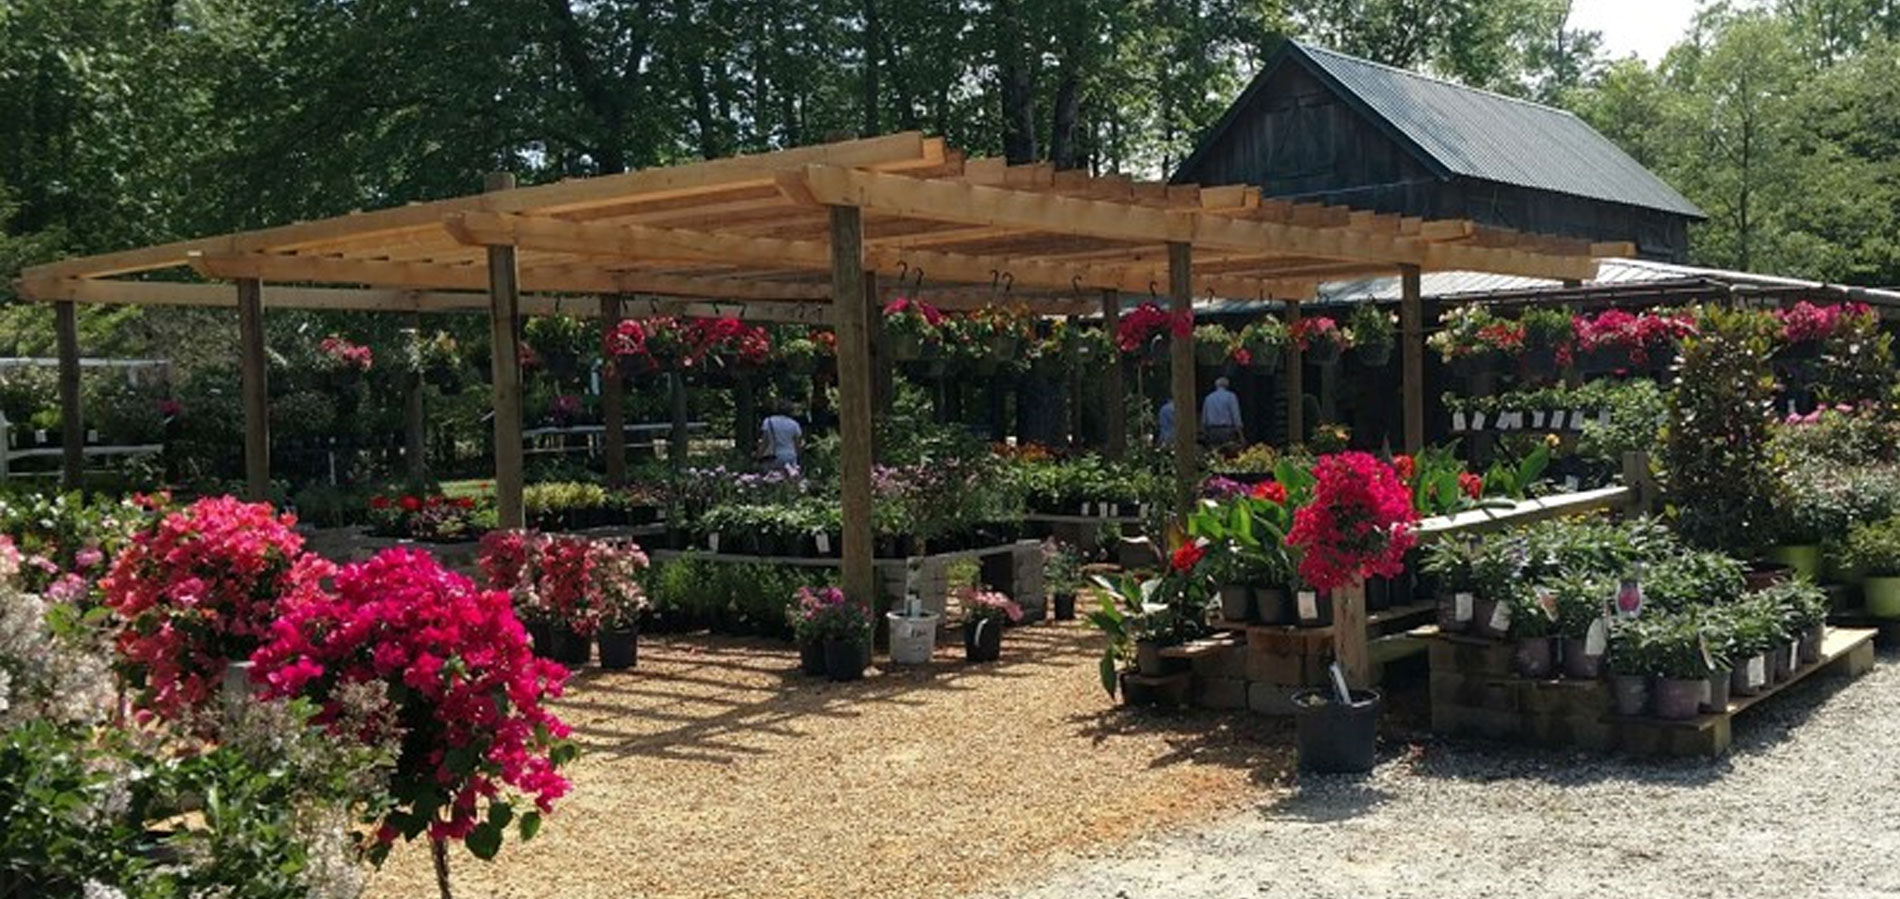 Plant Nursery And Garden Center Serving The Williamsburg Area